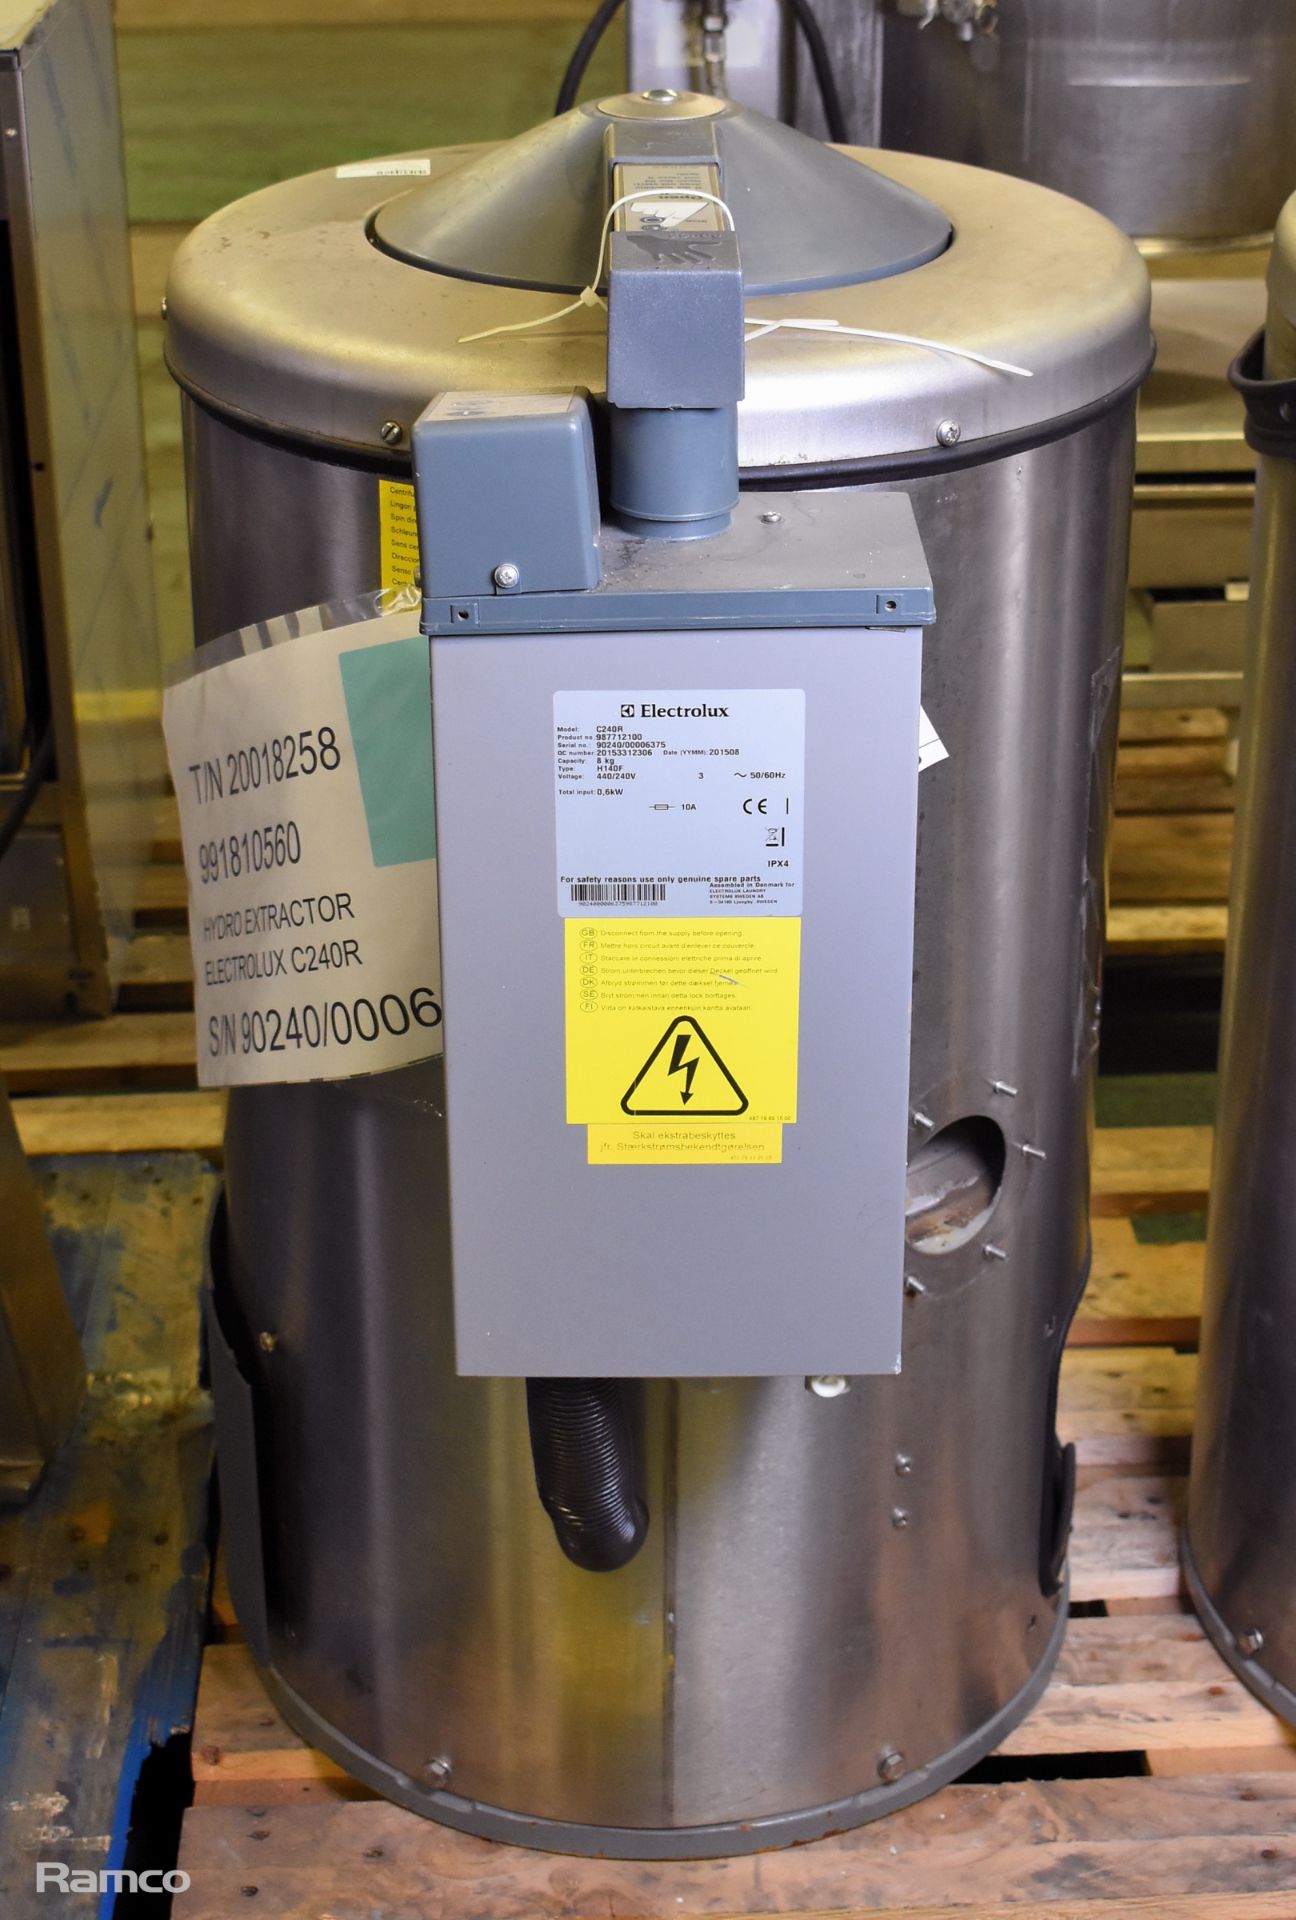 Electrolux C240R 8kg hydro extractor - W 515 x D 660 x H 910mm - MISSING BOTTOM COVER - Image 5 of 6